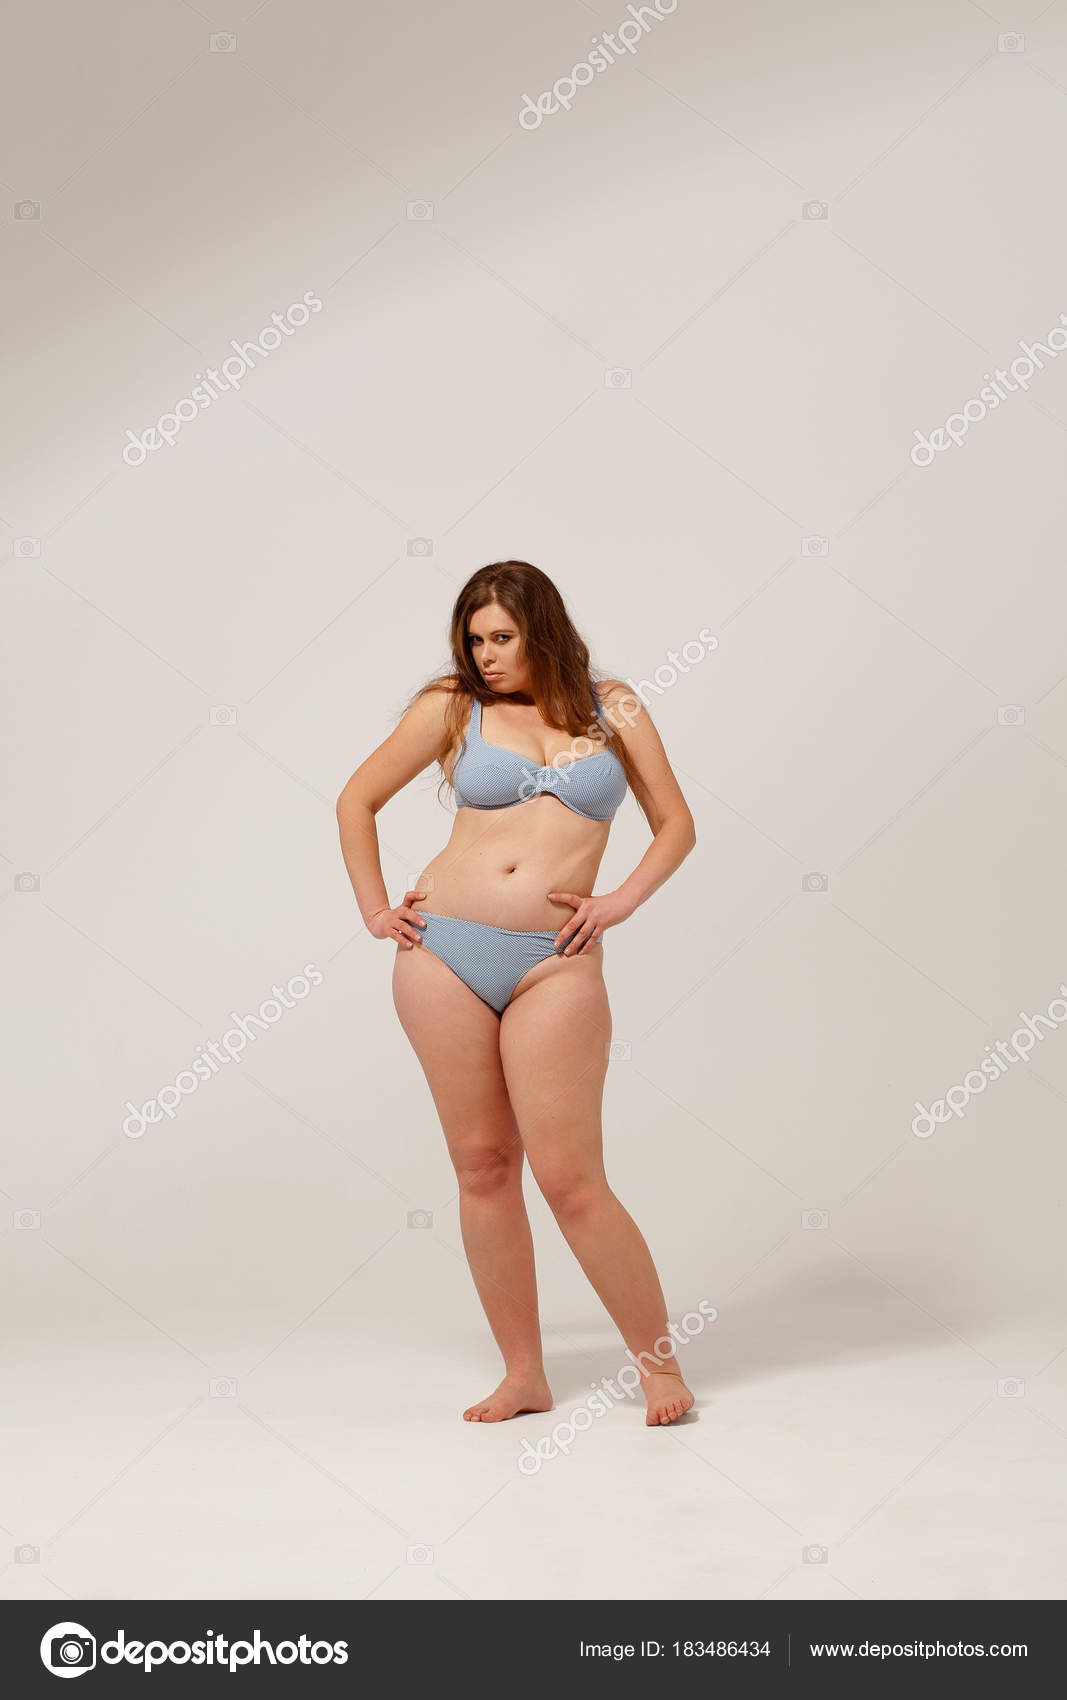 The 28 most famous plus size models in the world | Woman & Home